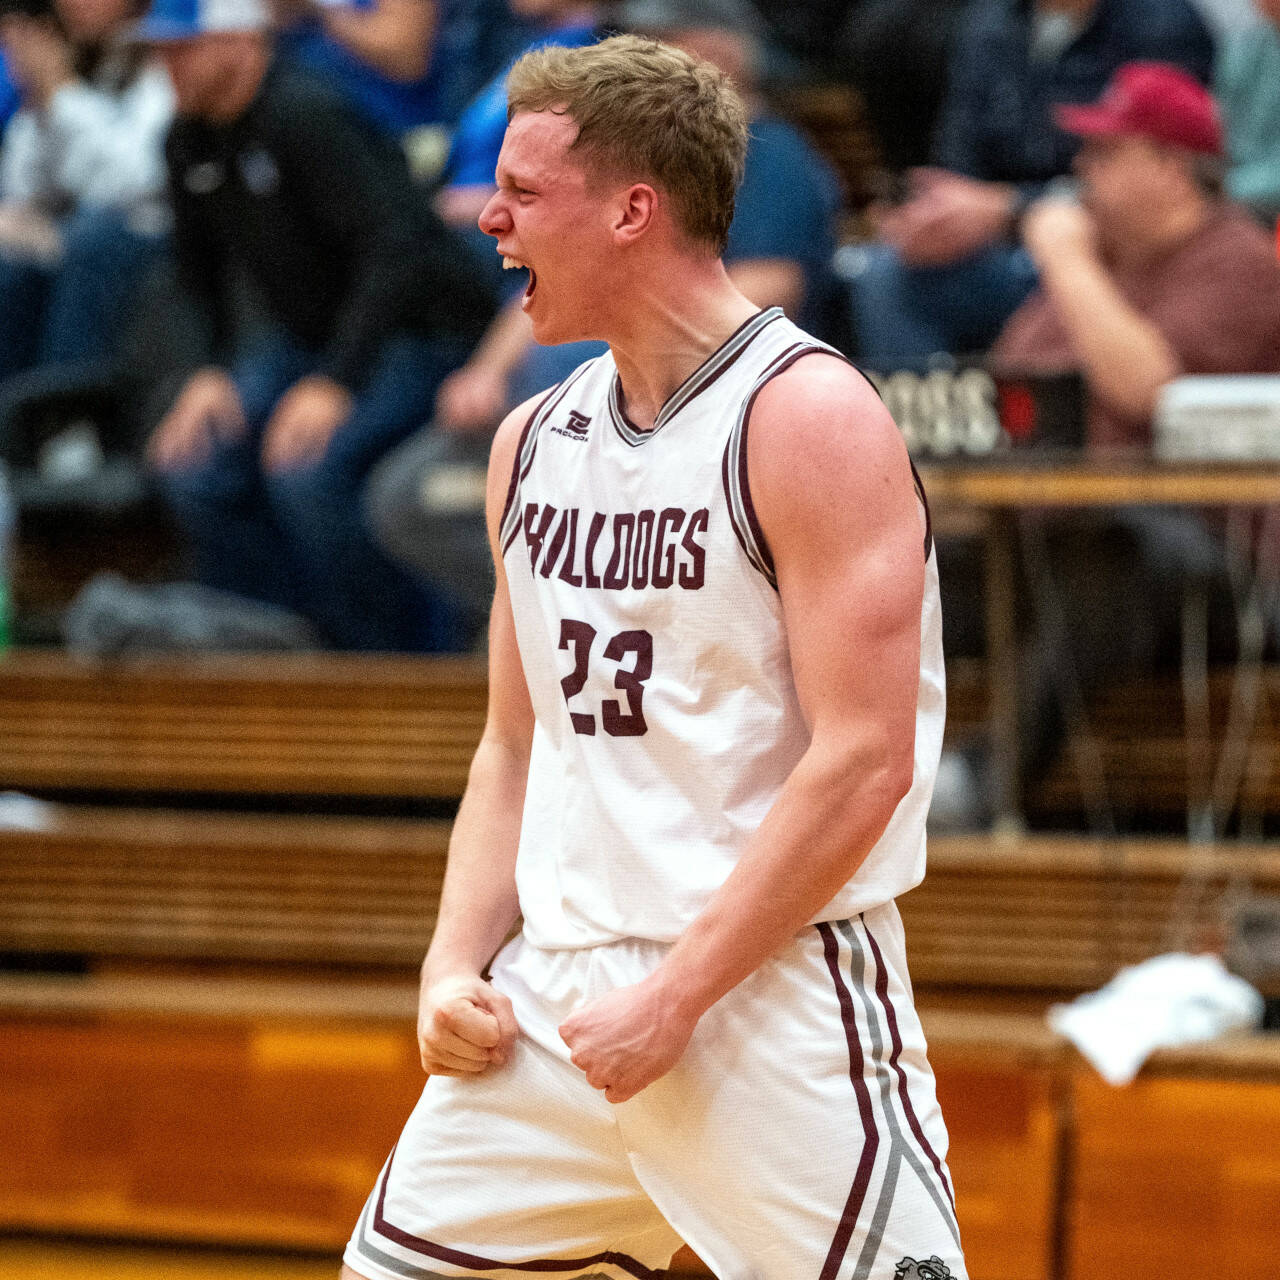 PHOTO BY FOREST WORGUM Montesano senior Tyce Peterson, seen here in a file photo, figures to play a key role when the No. 12 Bulldogs take on No. 13 Sultan in a 1A State first-round game on Saturday in Tumwater.